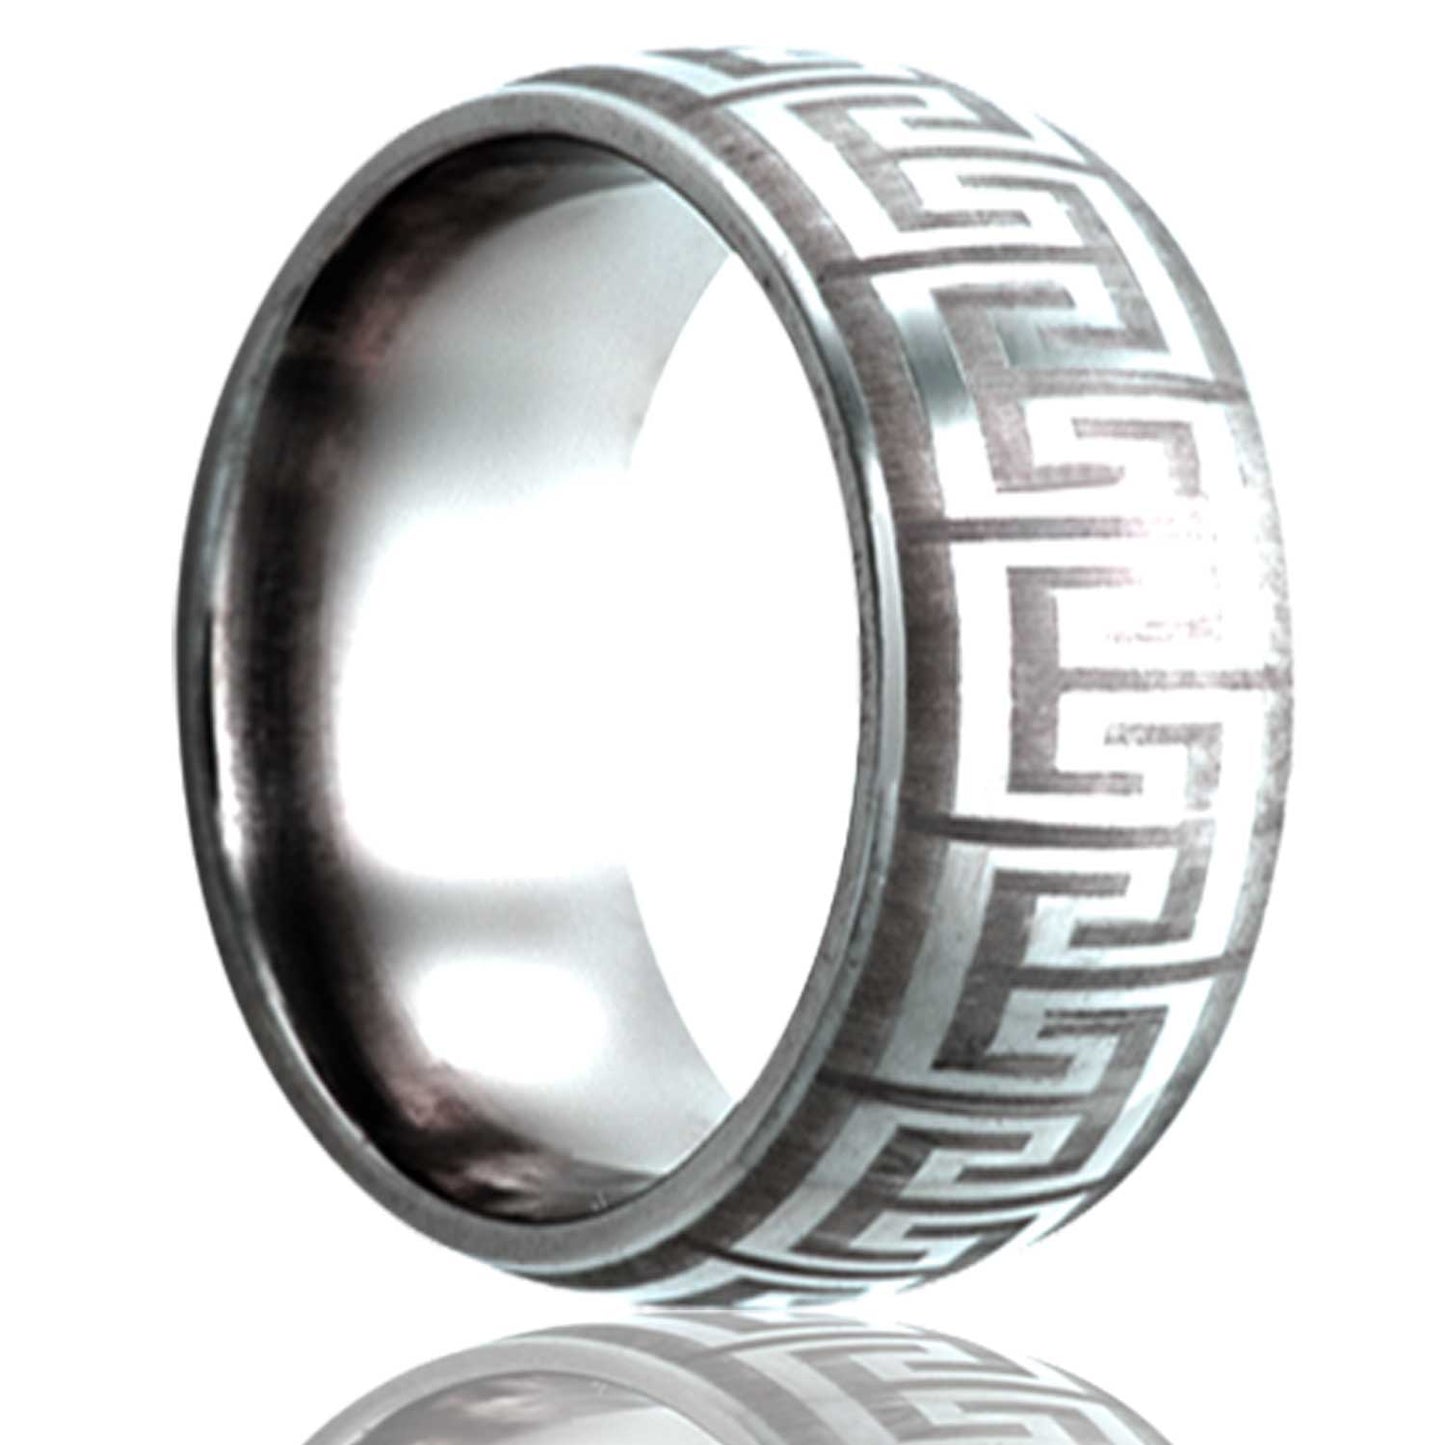 A greek key engraved domed cobalt wedding band displayed on a neutral white background.